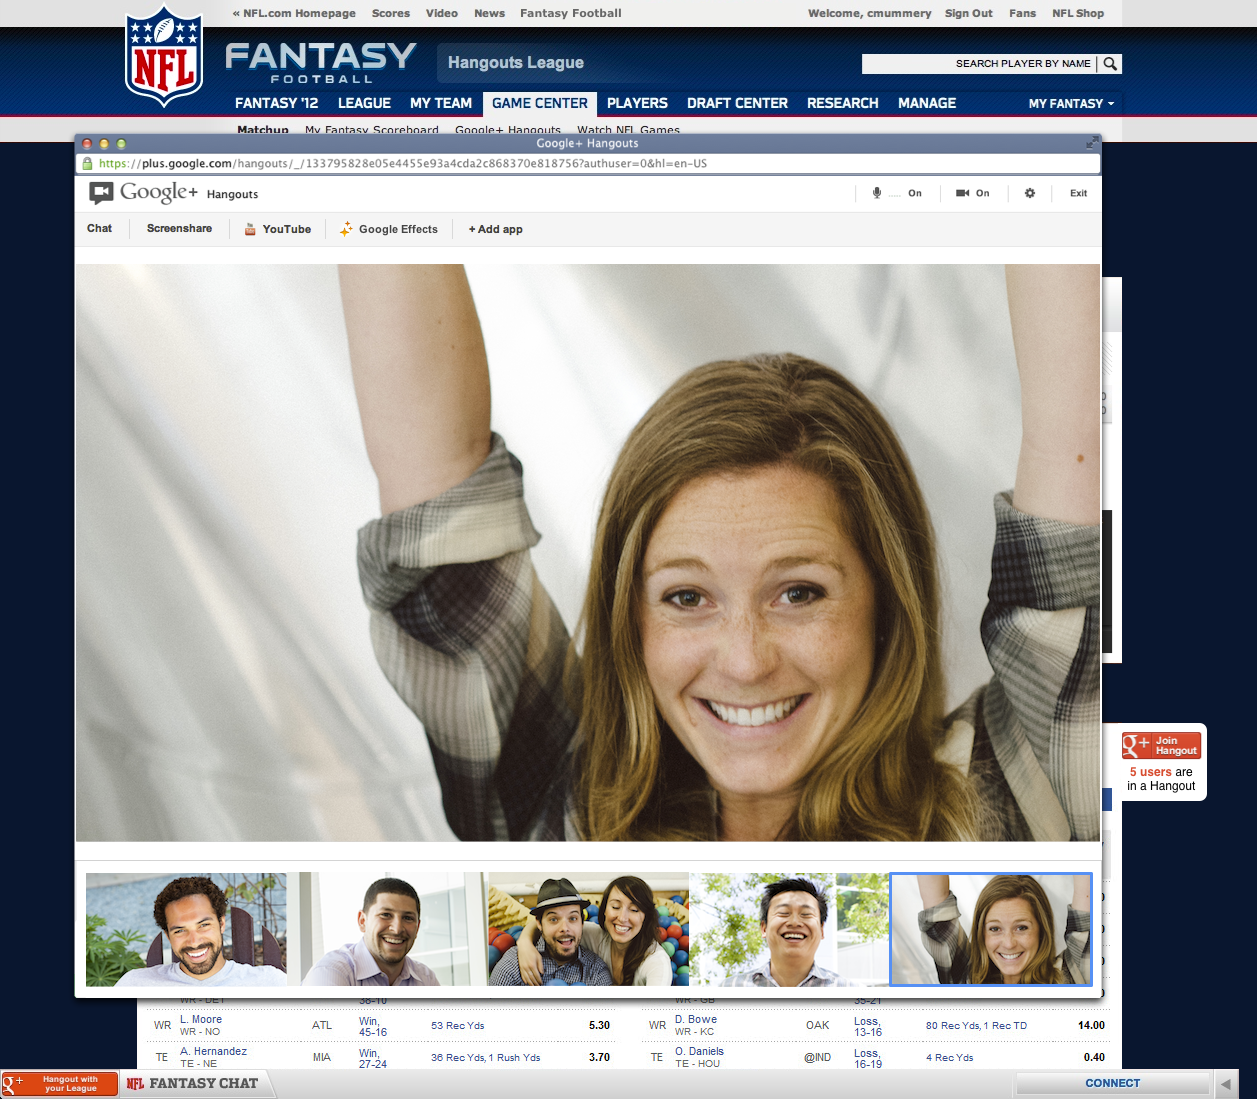 Google+ Hangouts and the NFL fantasy football, face-to-face-to-face